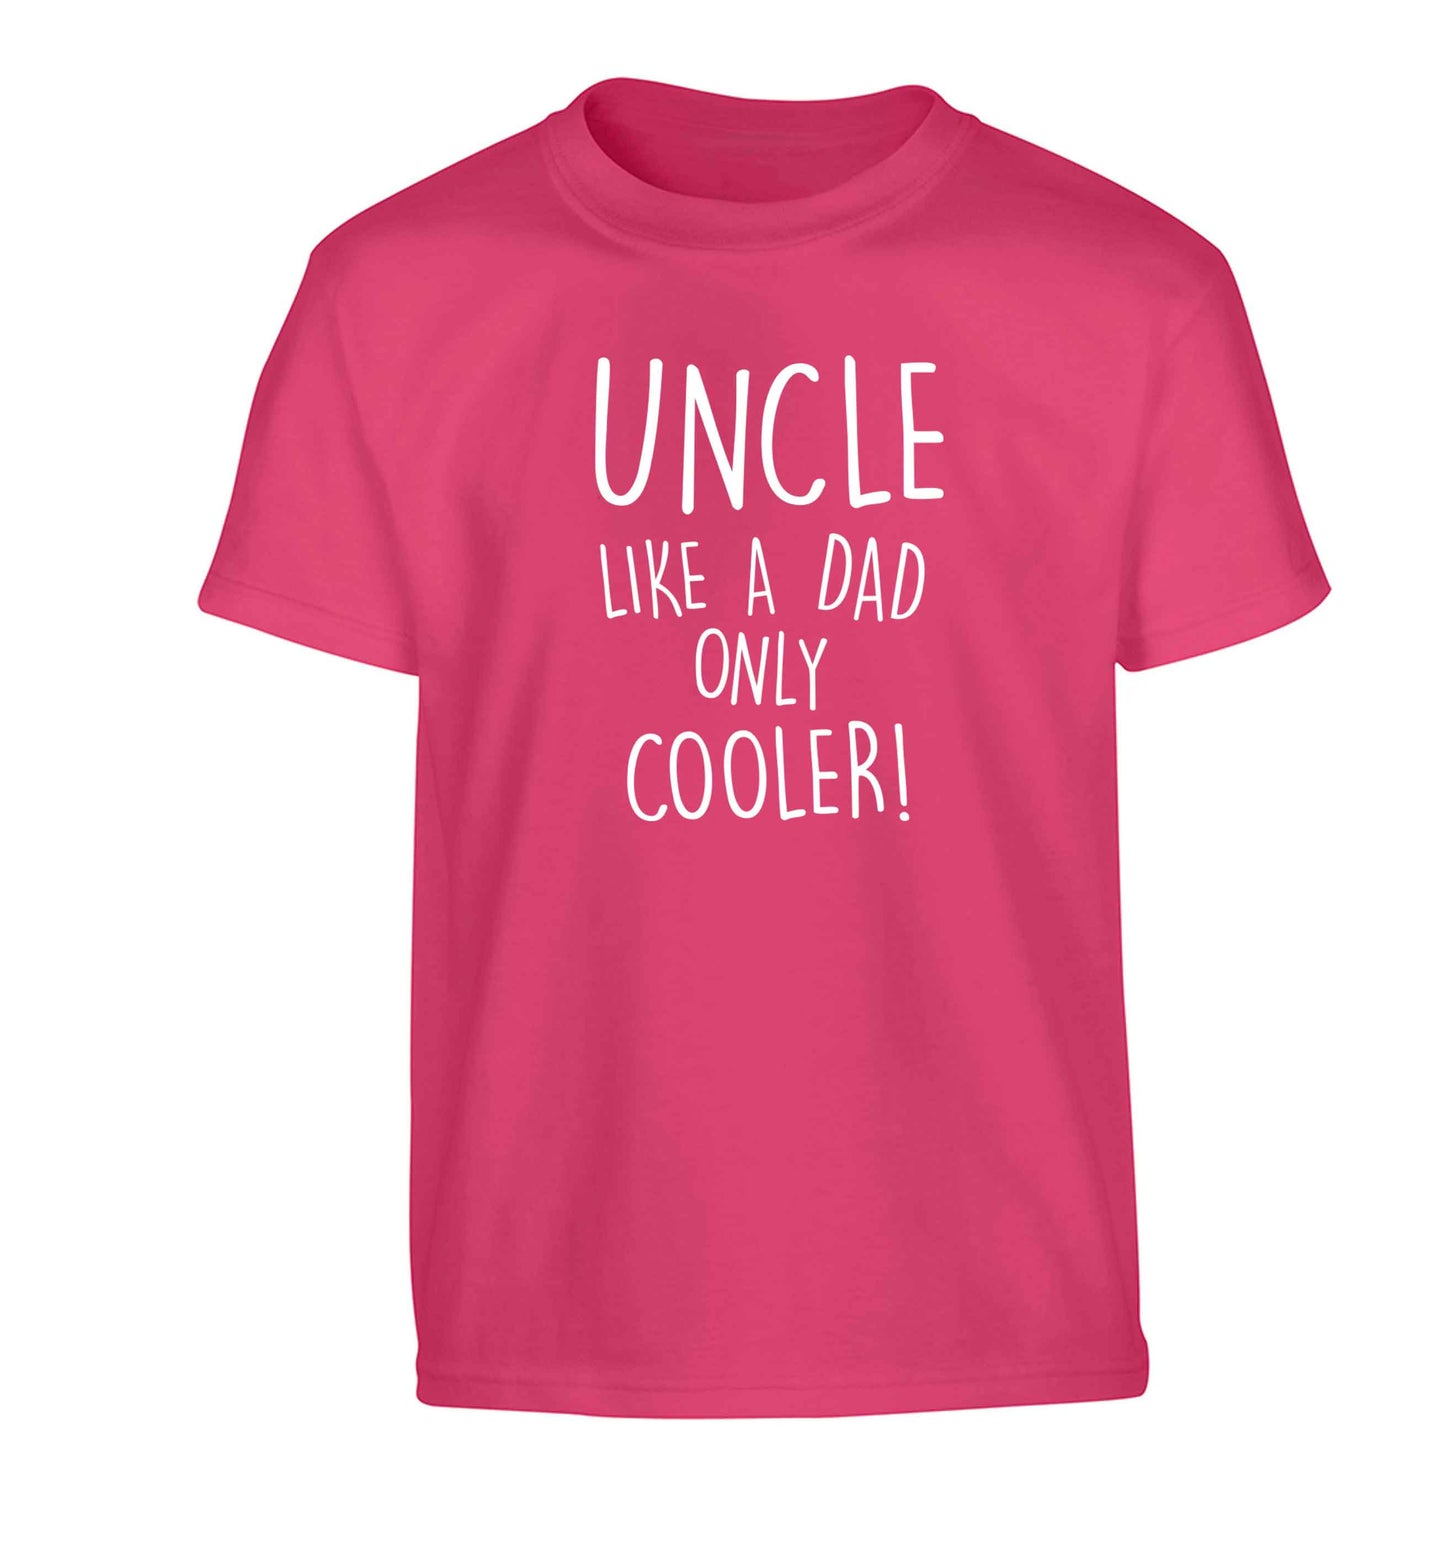 Uncle like a dad only cooler Children's pink Tshirt 12-13 Years